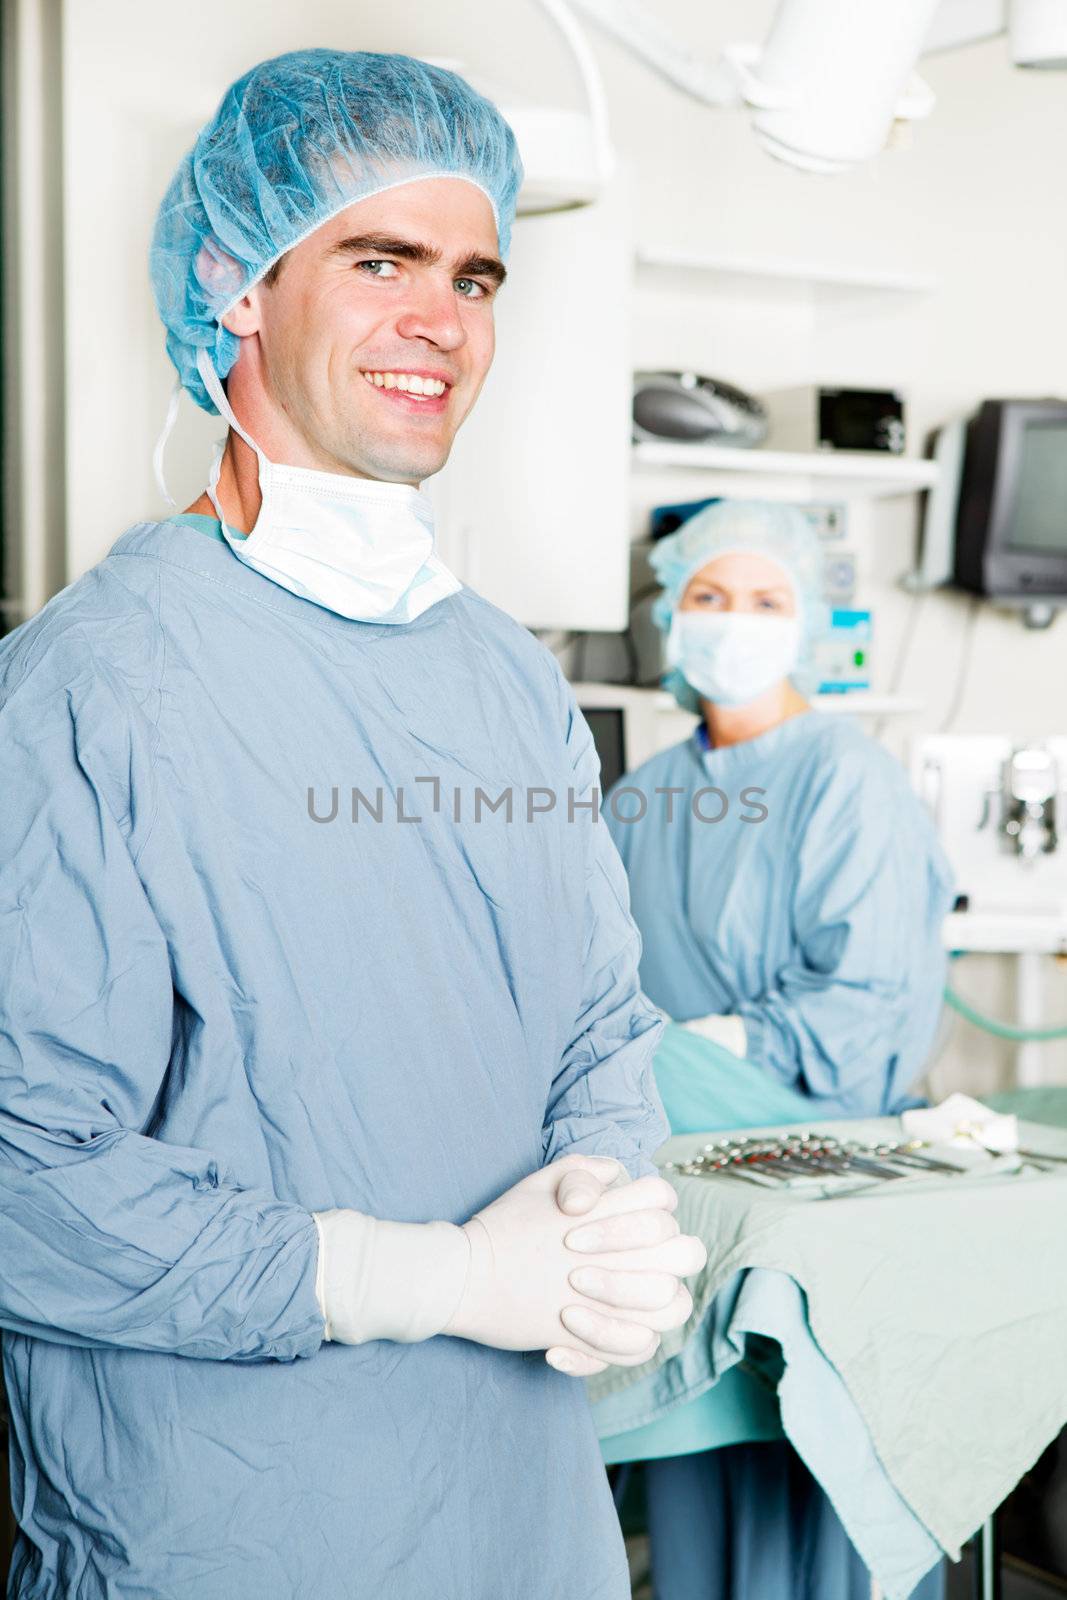 A portrait of a male surgeon with an opration theater in the background